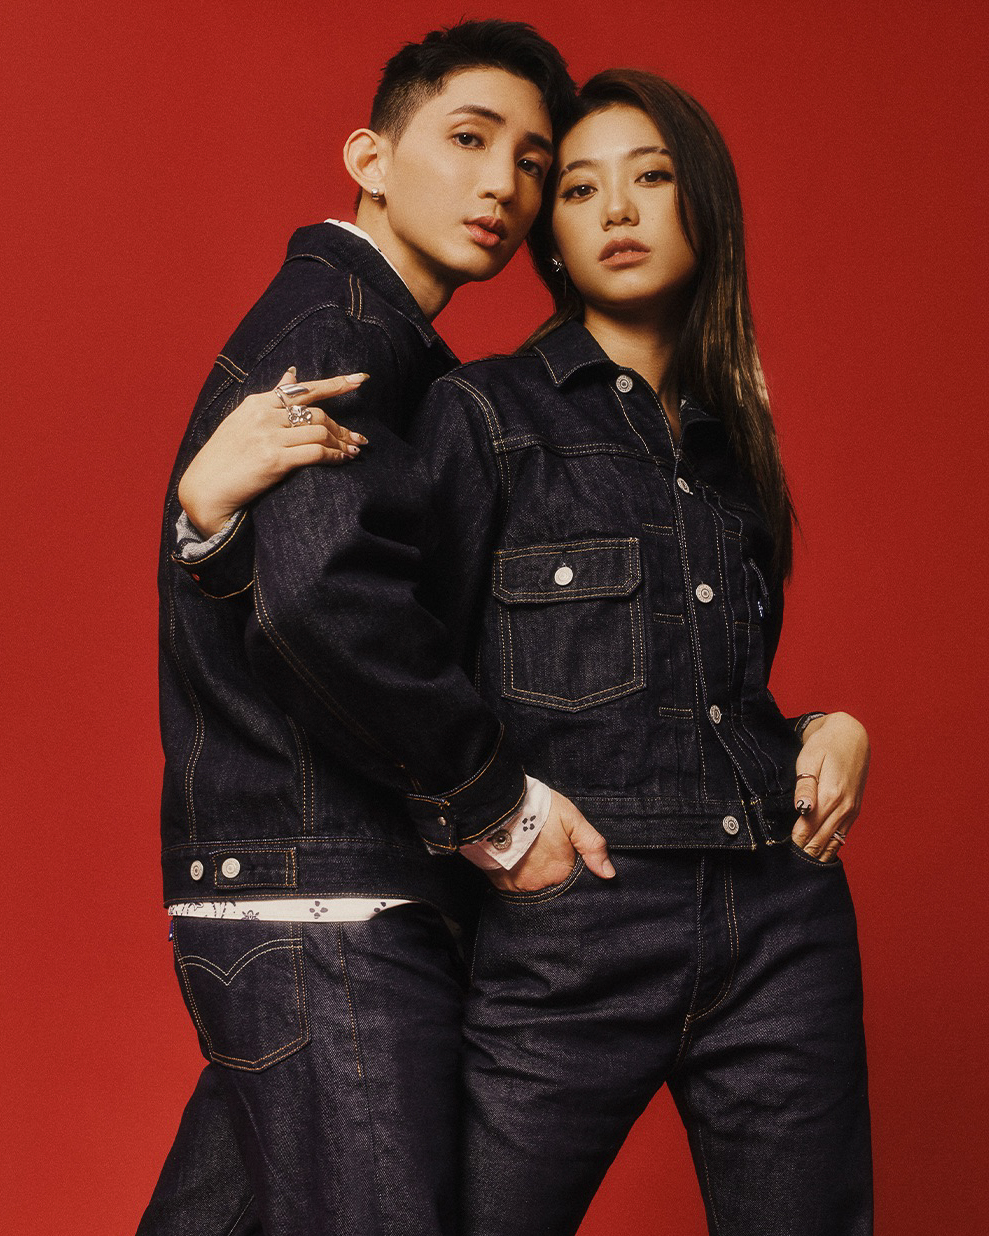 Levi’s “Through the Line” Lunar New Year Campaign